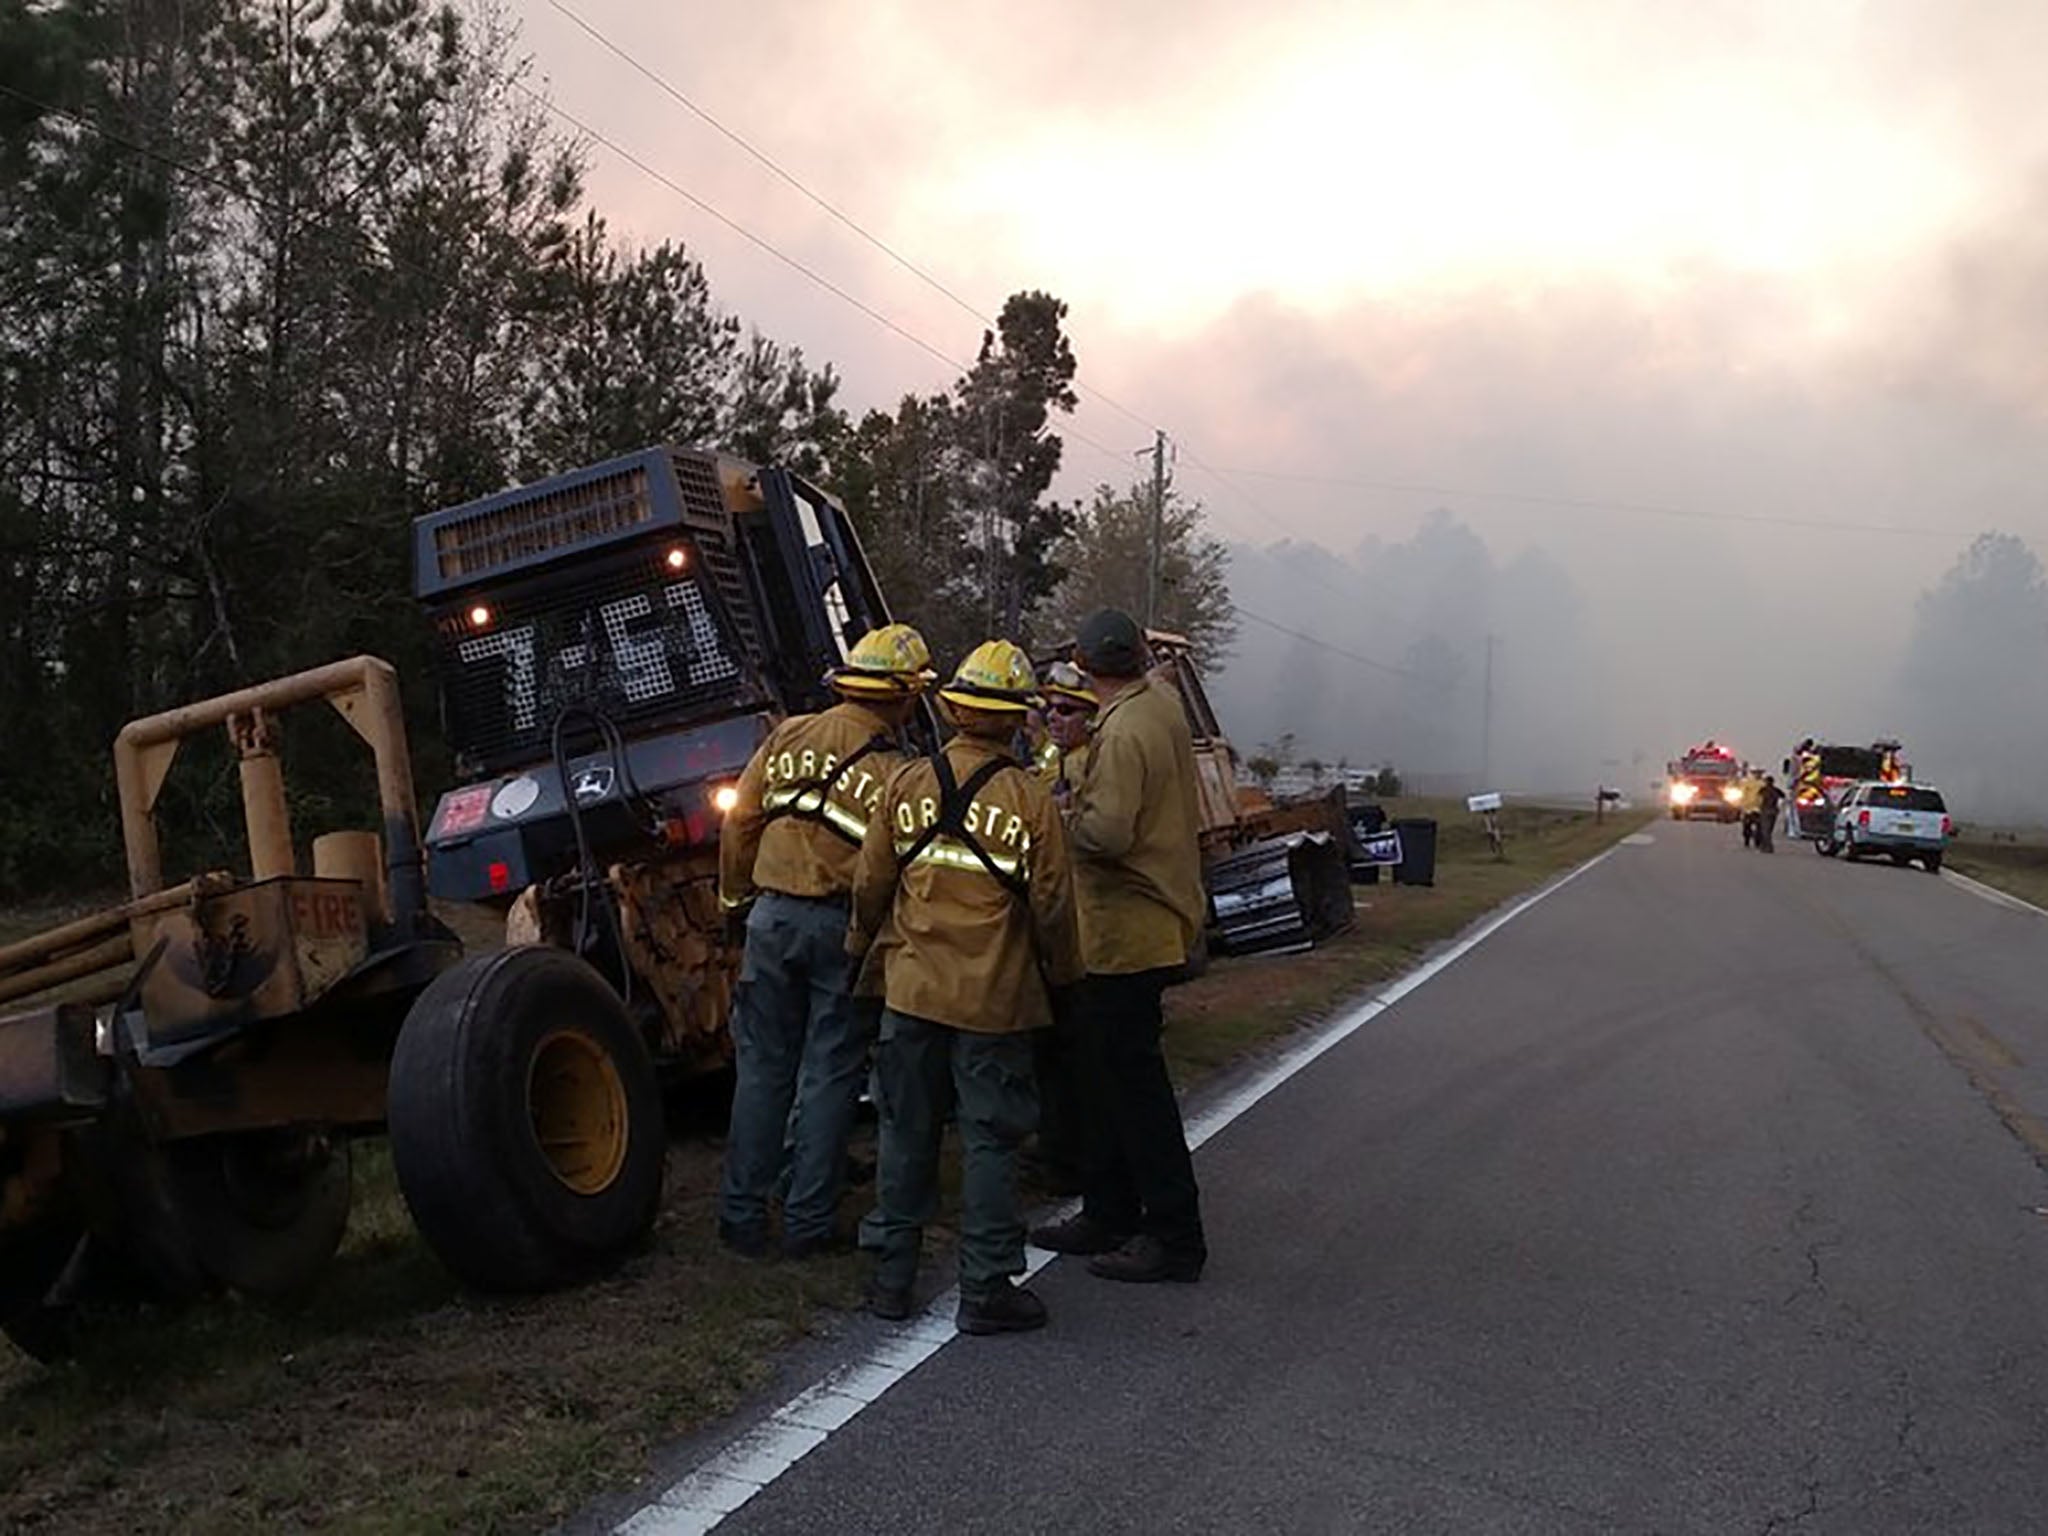 The wildfire burned an estimated 696 acres of land outside Jacksonville, a large city in the southeastern state